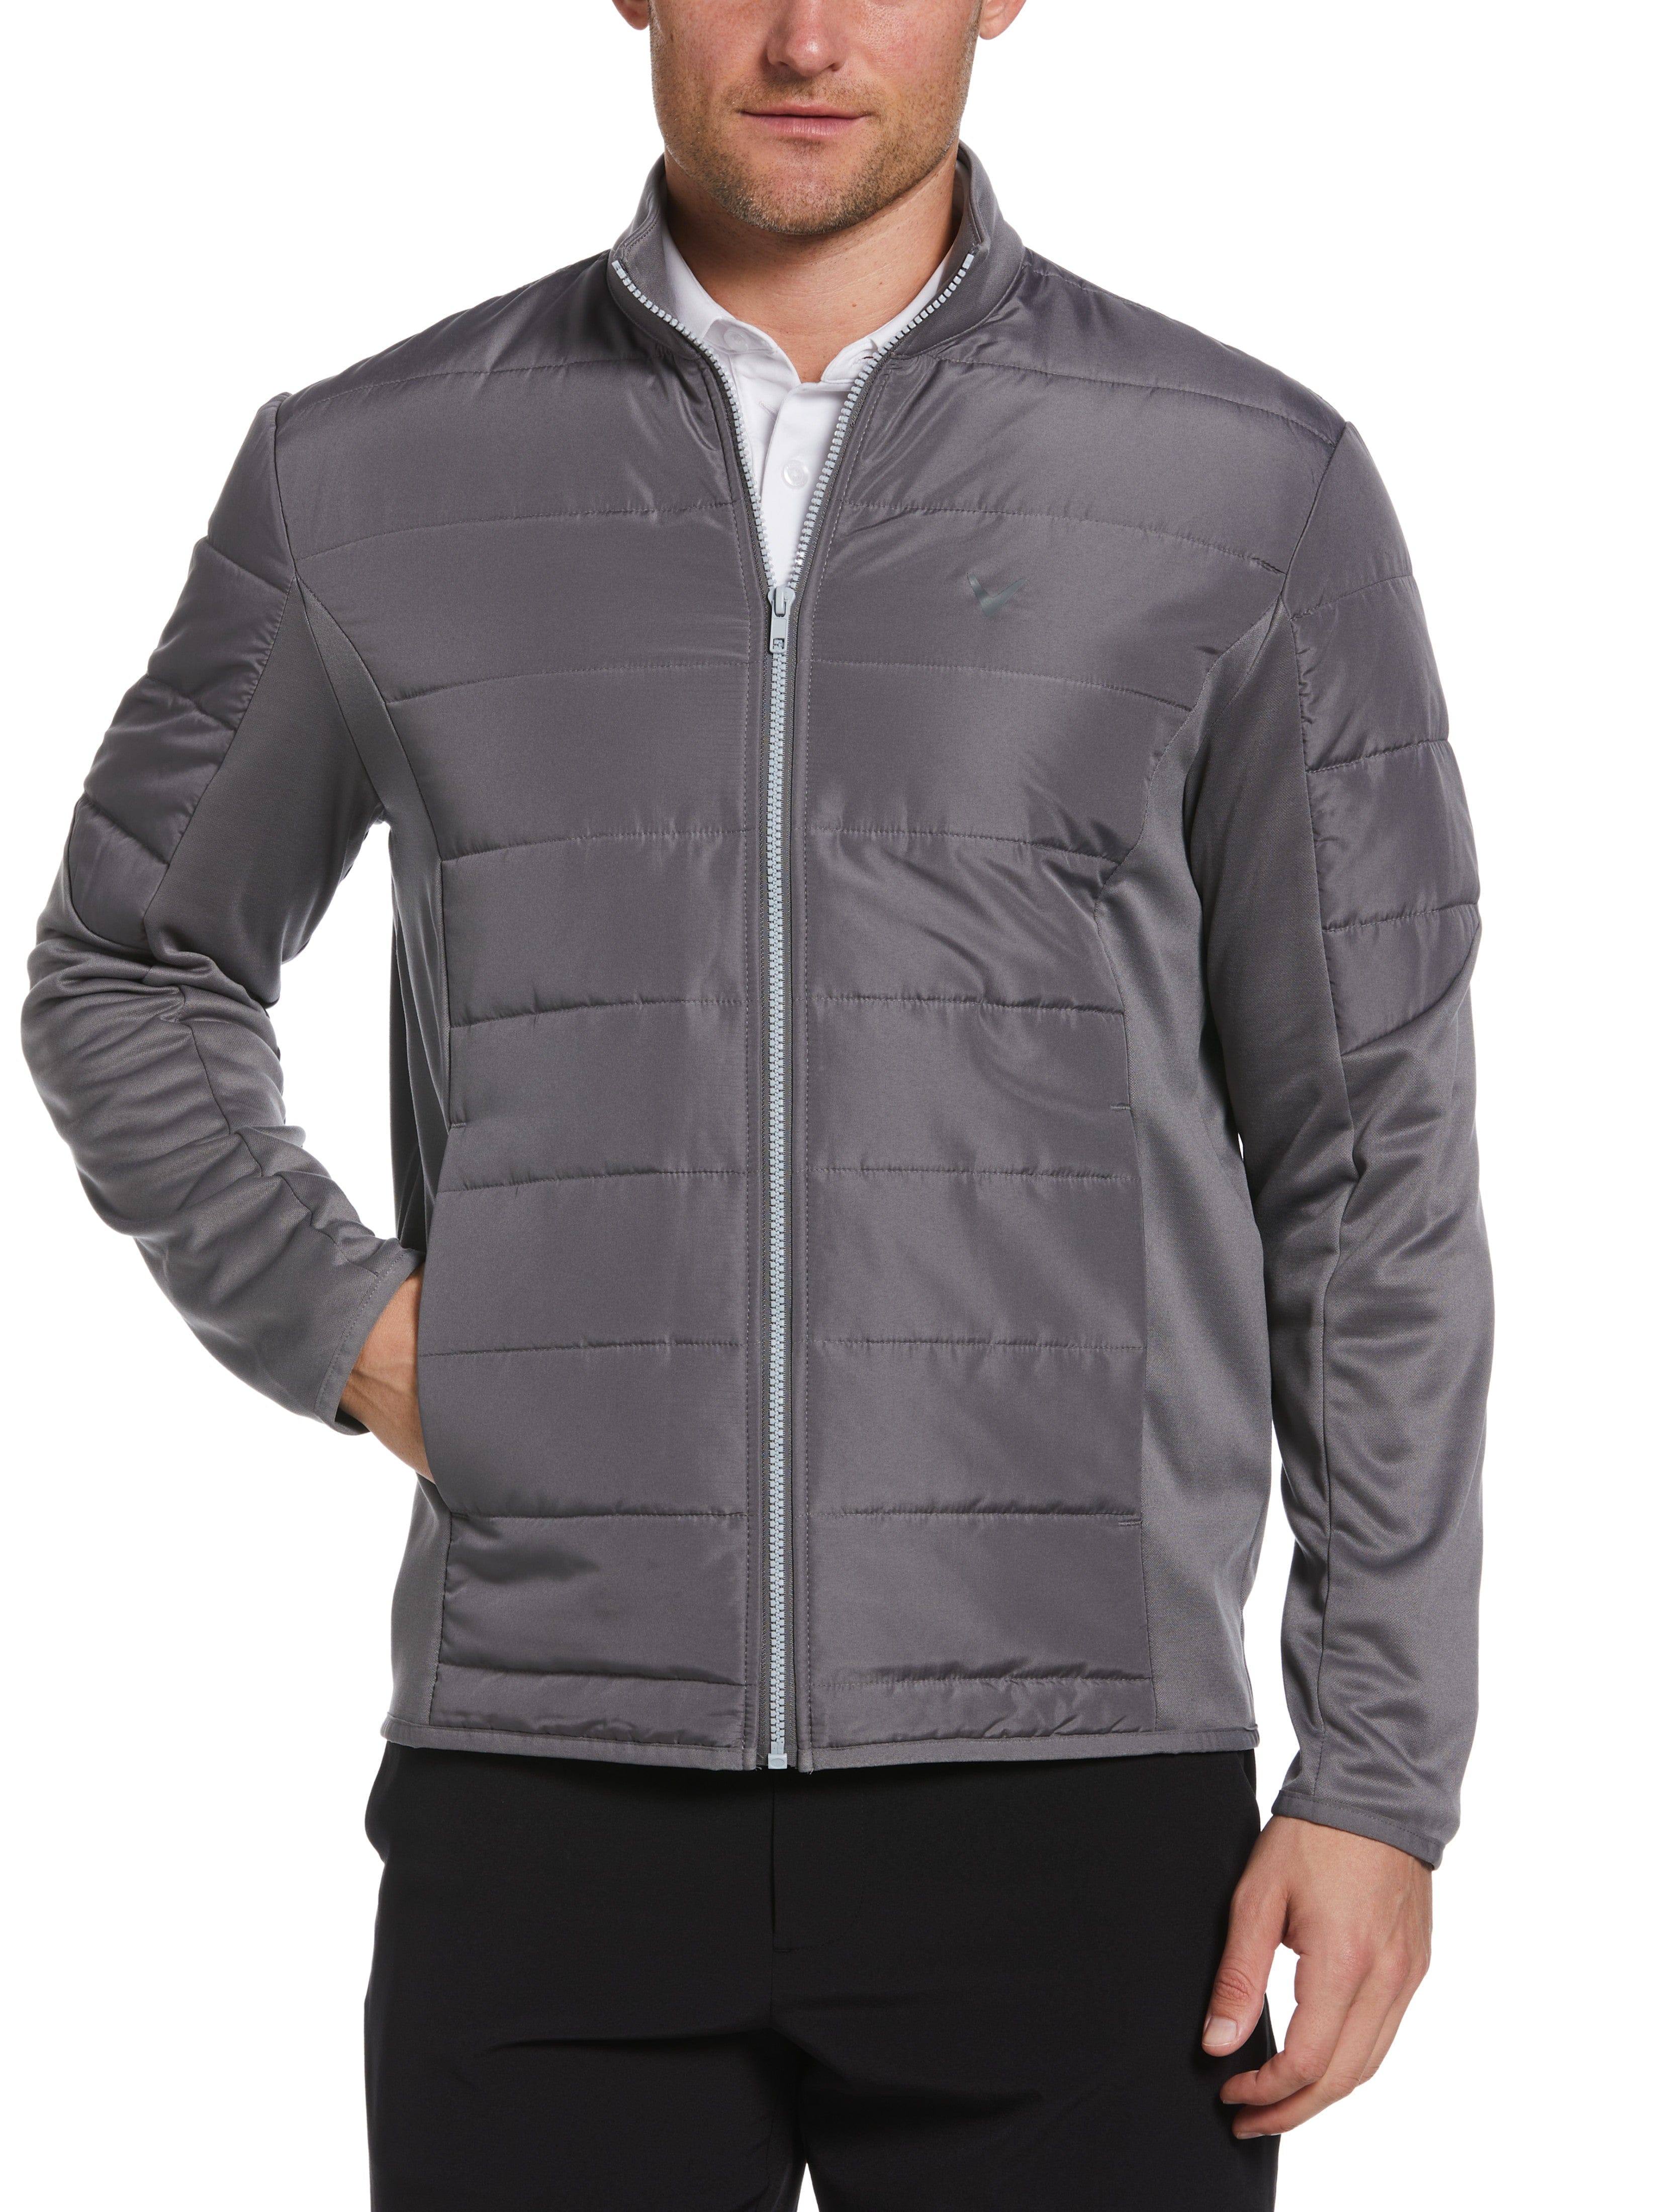 Callaway Apparel Mens Hybrid Performance Puffer Jacket Top, Size Small, Quiet Shade Gray, 100% Polyester | Golf Apparel Shop